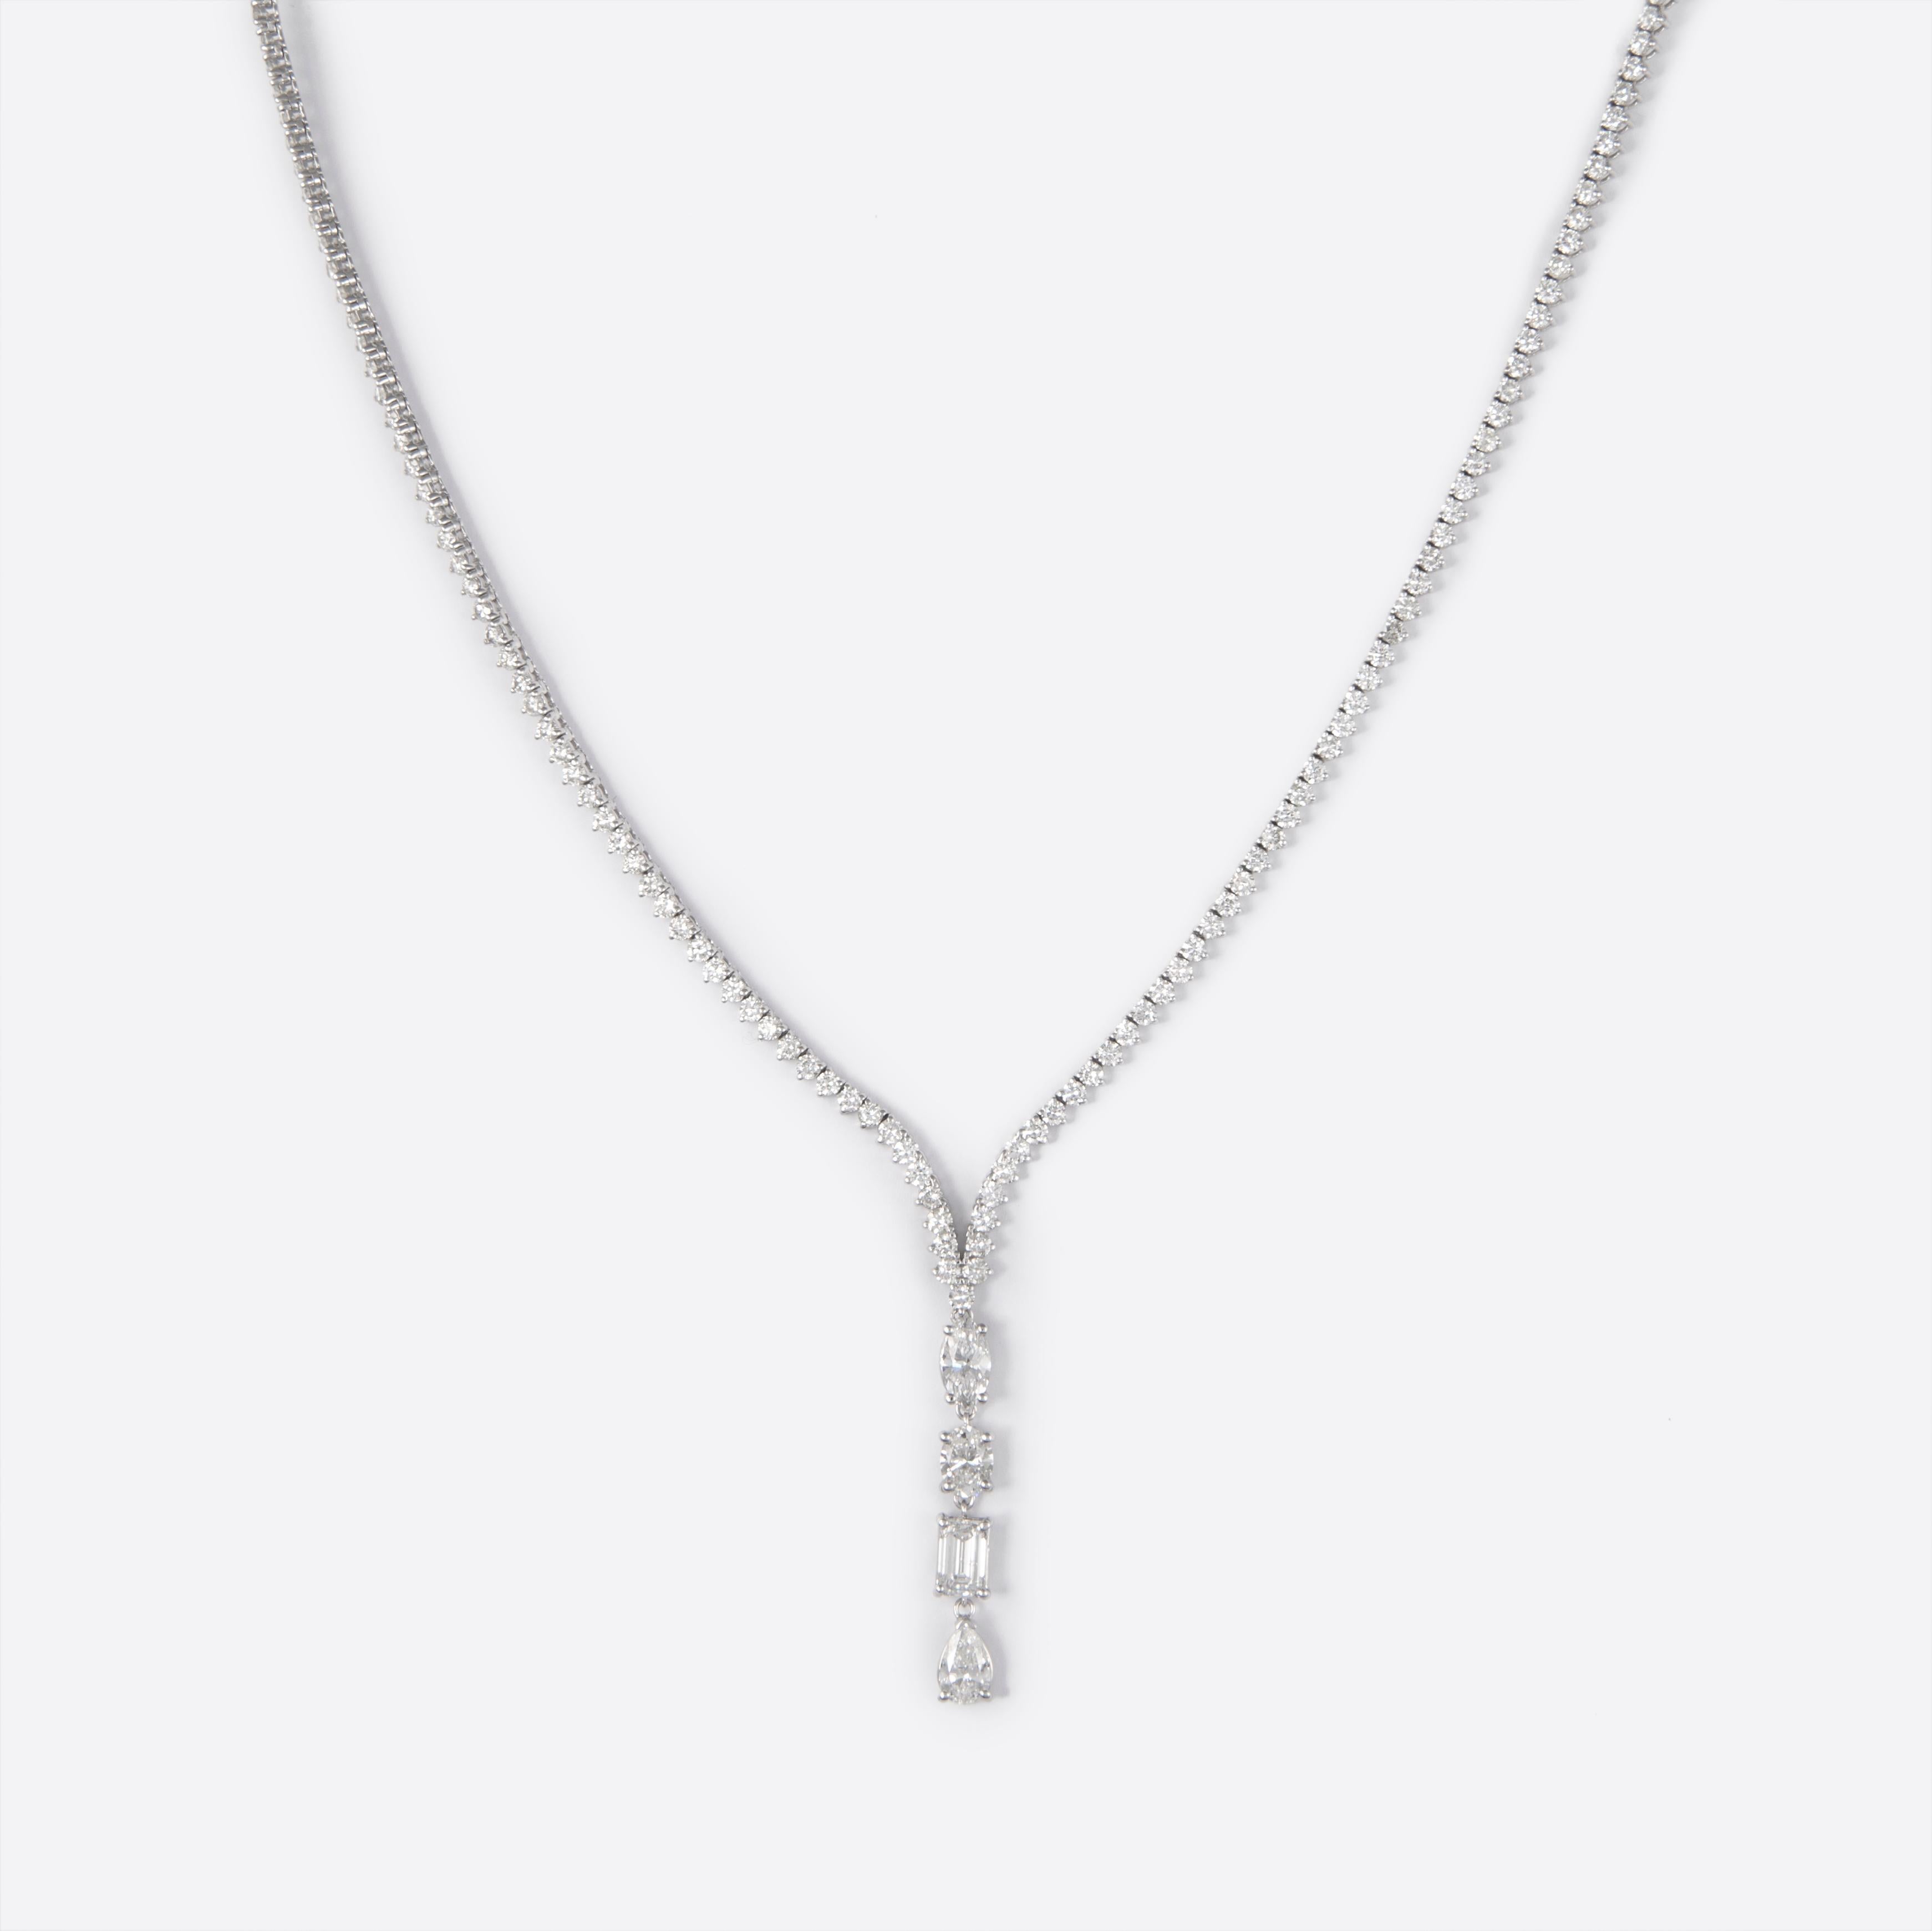 Alexander 8.64 Carat Diamond Drop Tennis Necklace 18 Karat White Gold In New Condition For Sale In BEVERLY HILLS, CA